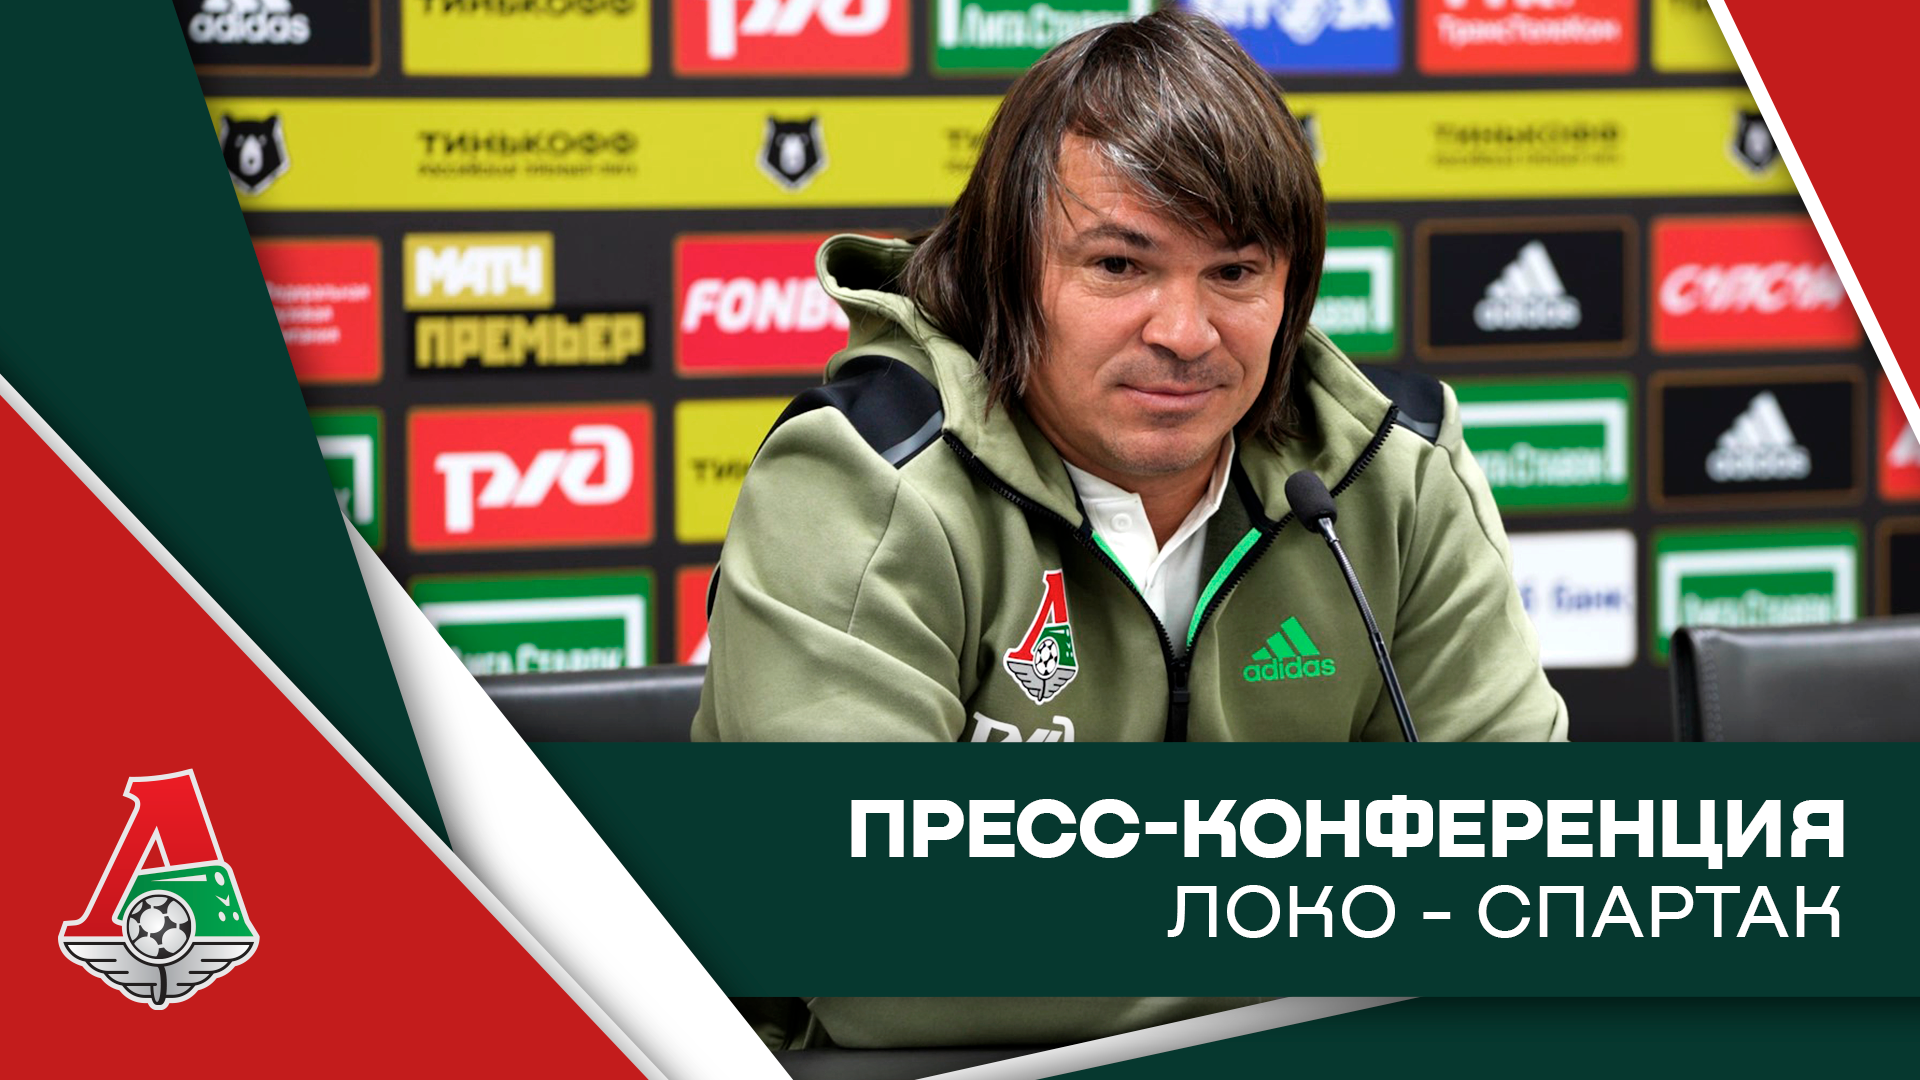 Dmitry Loskov's press-conference after the win against Spartak